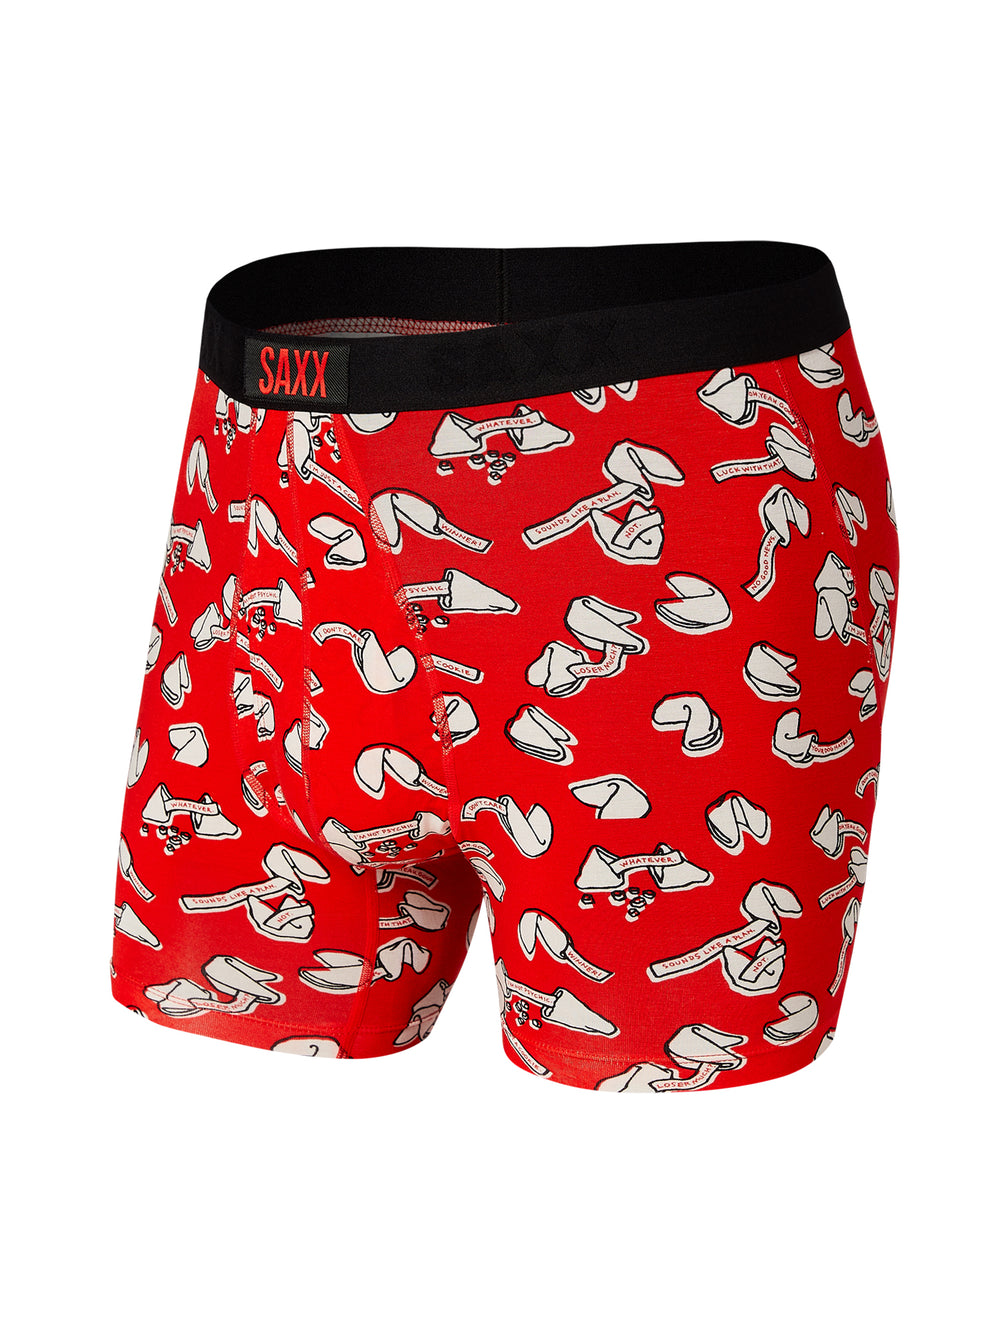 SAXX ULTRA BOXER BRIEF - MISFORTUNE COOKIE - CLEARANCE